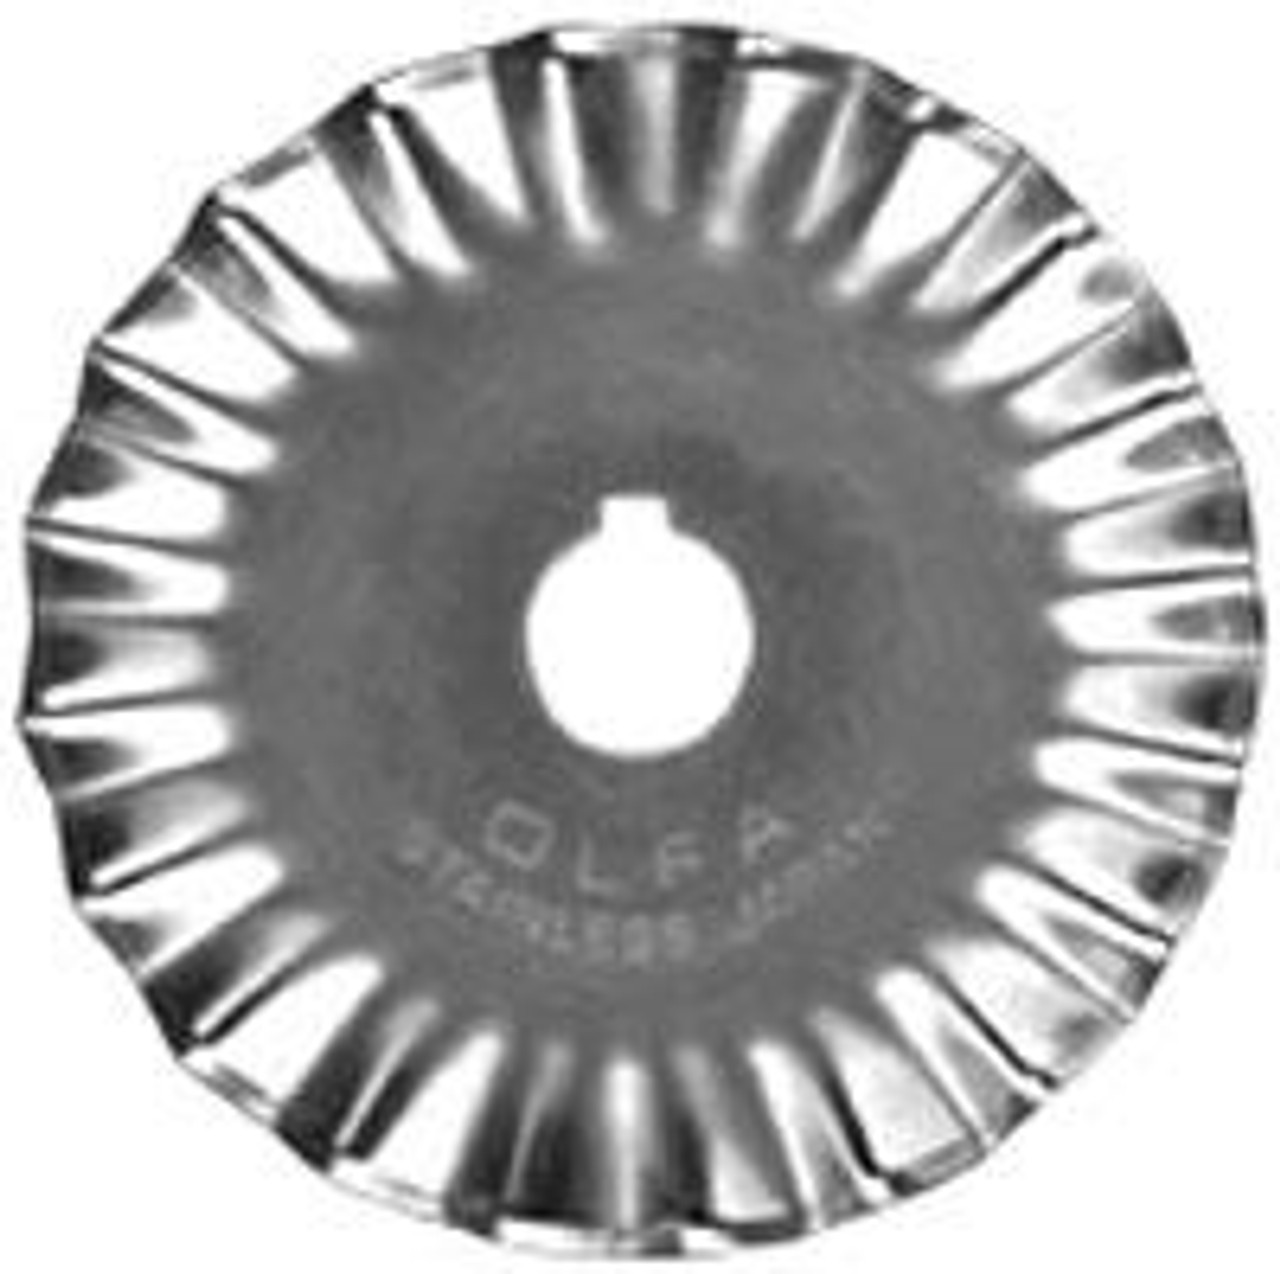 OLFA 45mm Rotary Cutter Pinking Blade, 1 Blade (PIB45-1) - Stainless Steel  Circular Decorative Edge Blade for Crafts, Sewing, Quilting, Scrapbooking